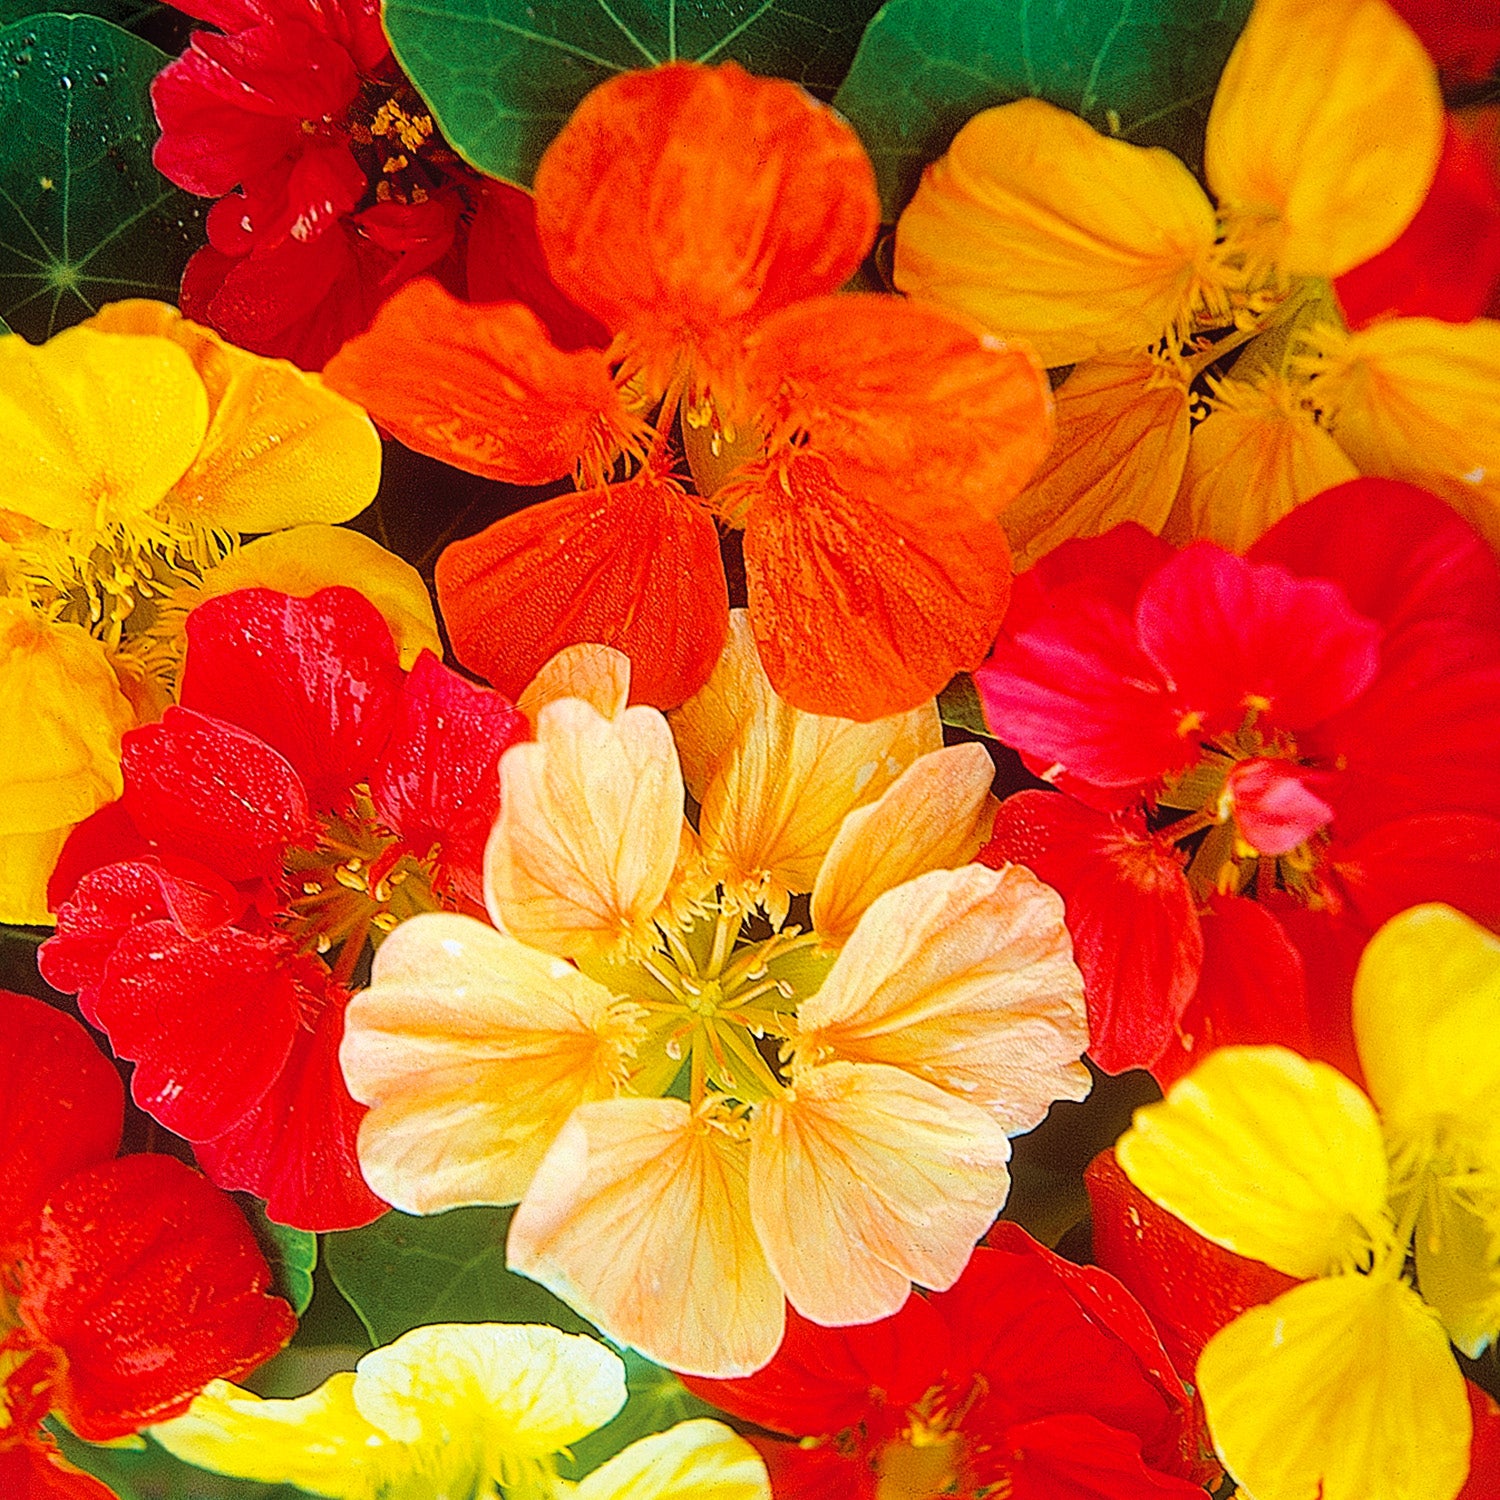 Jewel Mixed Colors Nasturtium seeds fully mature and blooming beautiful colors of yellow, orange, red and off-white.